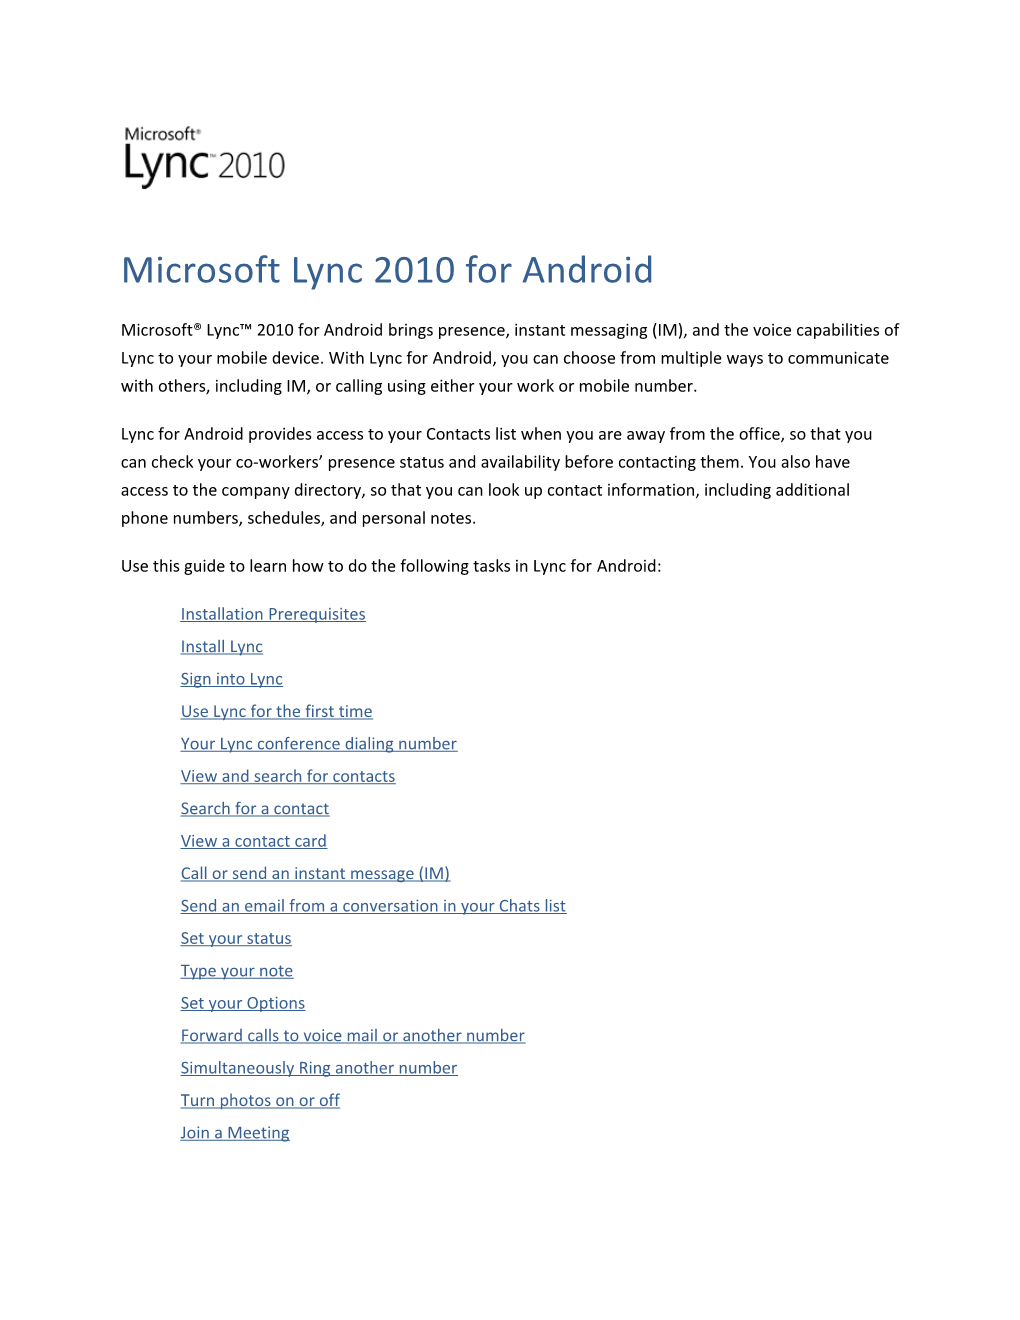 Microsoft Lync 2010 for Android Getting Started